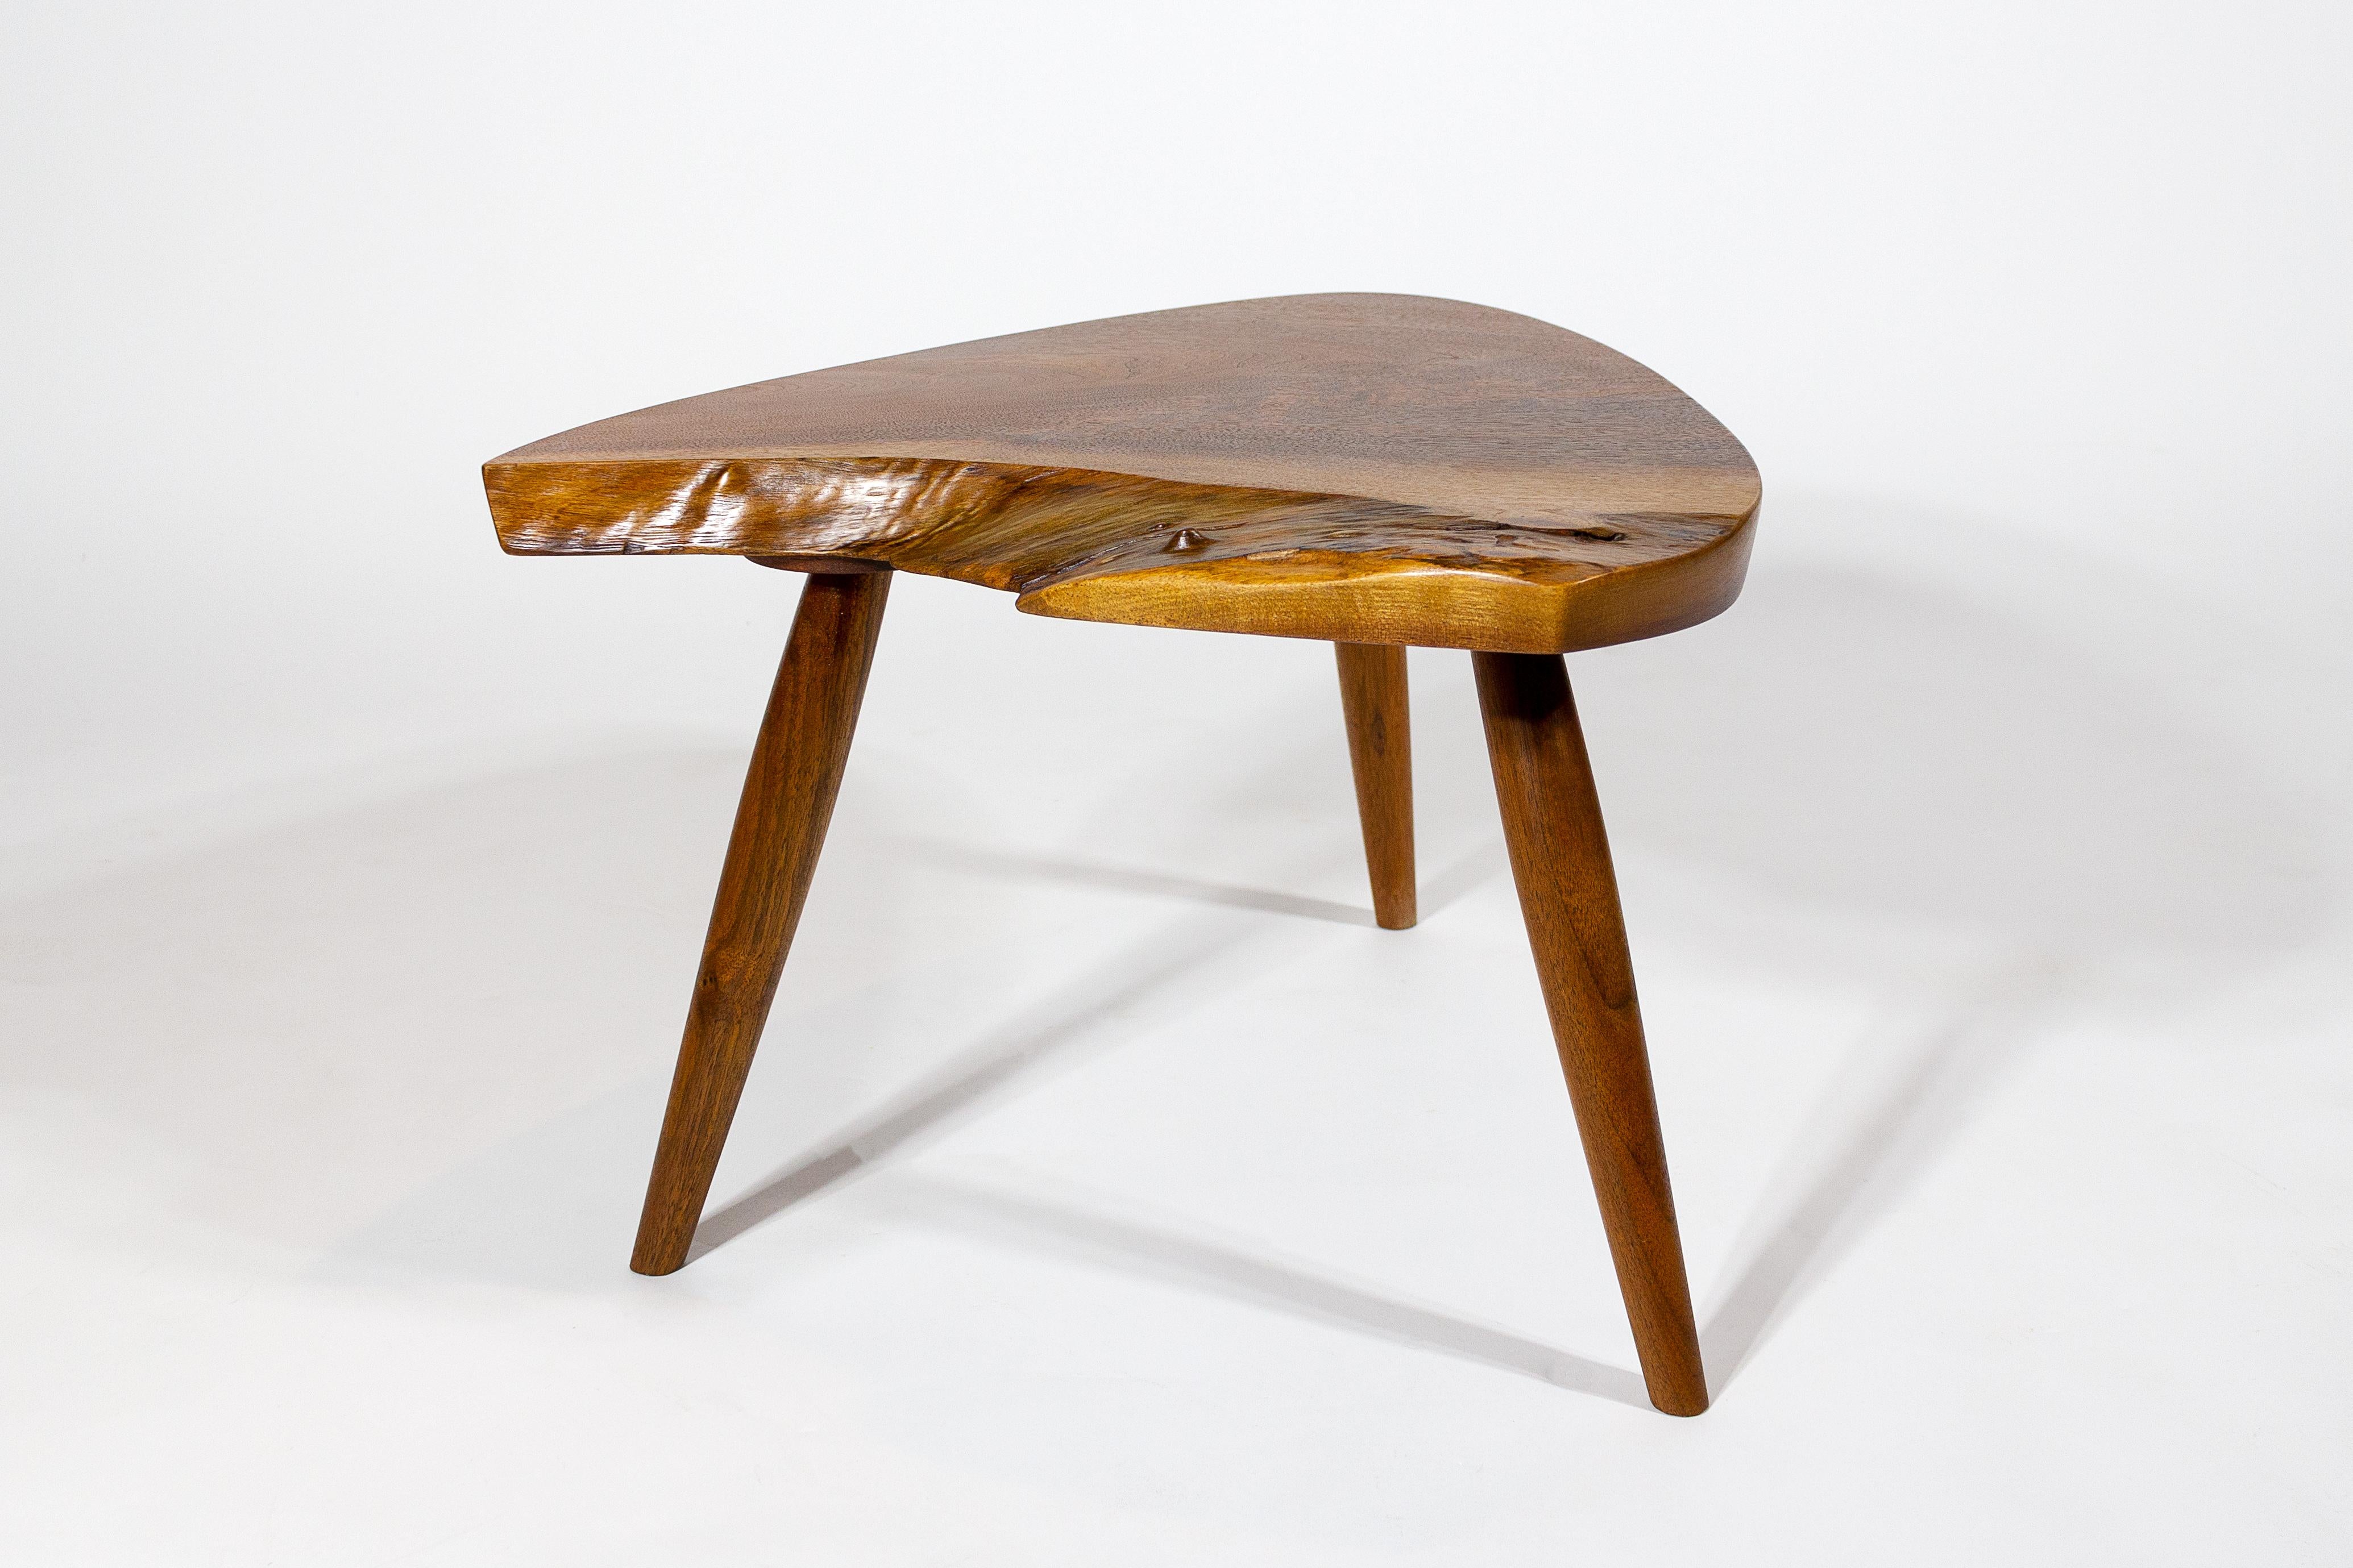 Set of three hand-made Wepman tripod side tables crafted in the George Nakashima Studio by his Daughter and protege Mira Nakashima. Commissioned for an important private Texas collection. Signed and dated to the underside. 

This trio of tables